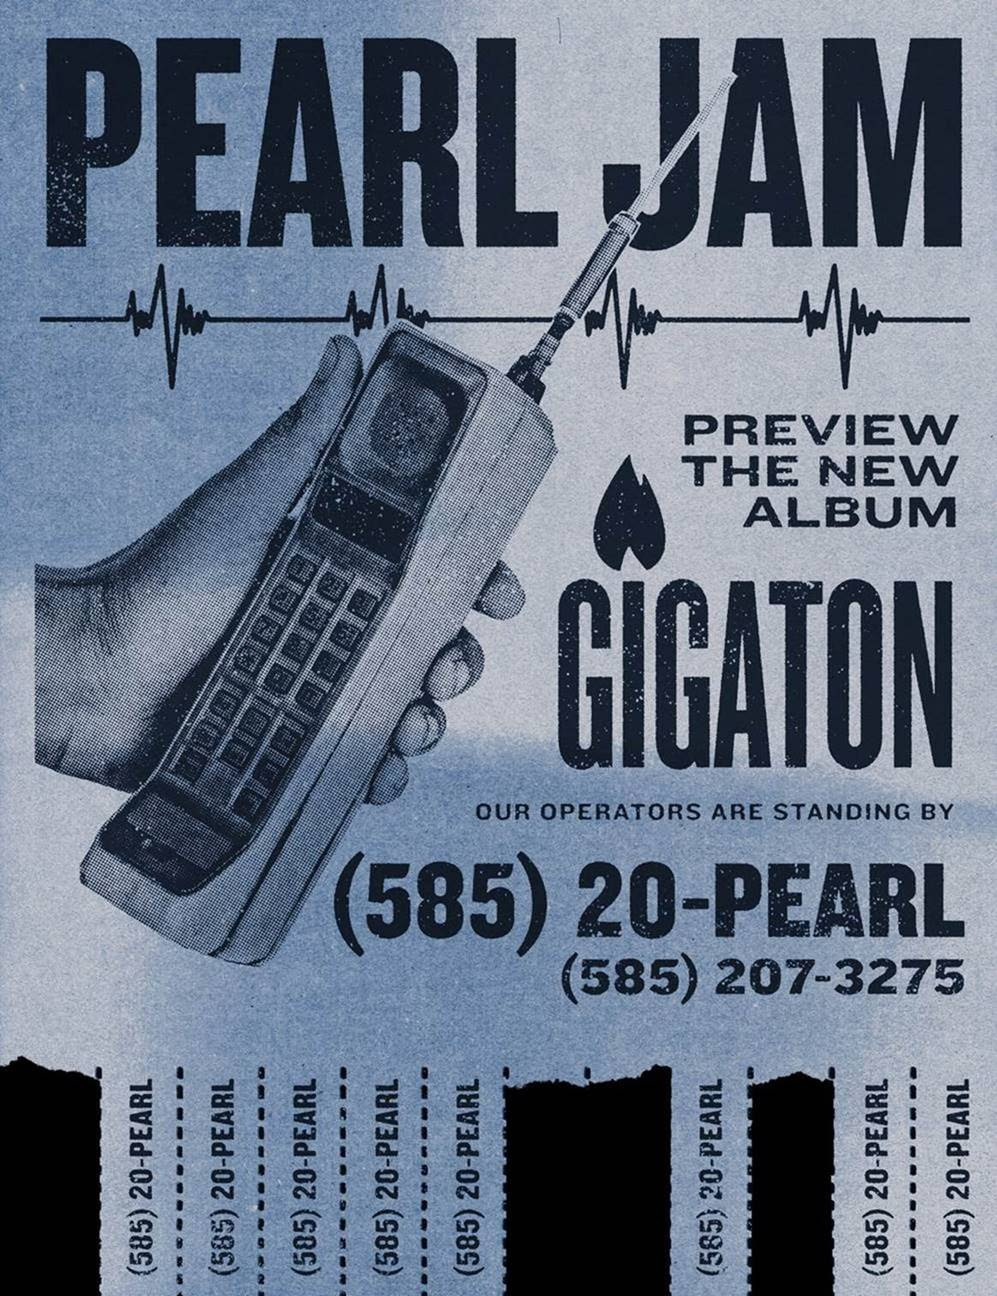 Pearl Jam Shares Hotline to Get Early Listen at <i> Gigaton</i>” title=”unnamed-1584990415″ data-original-id=”352125″ data-adjusted-id=”352125″ class=”sm_size_full_width sm_alignment_center ” data-image-use=”multiple_use” /></p><div class=